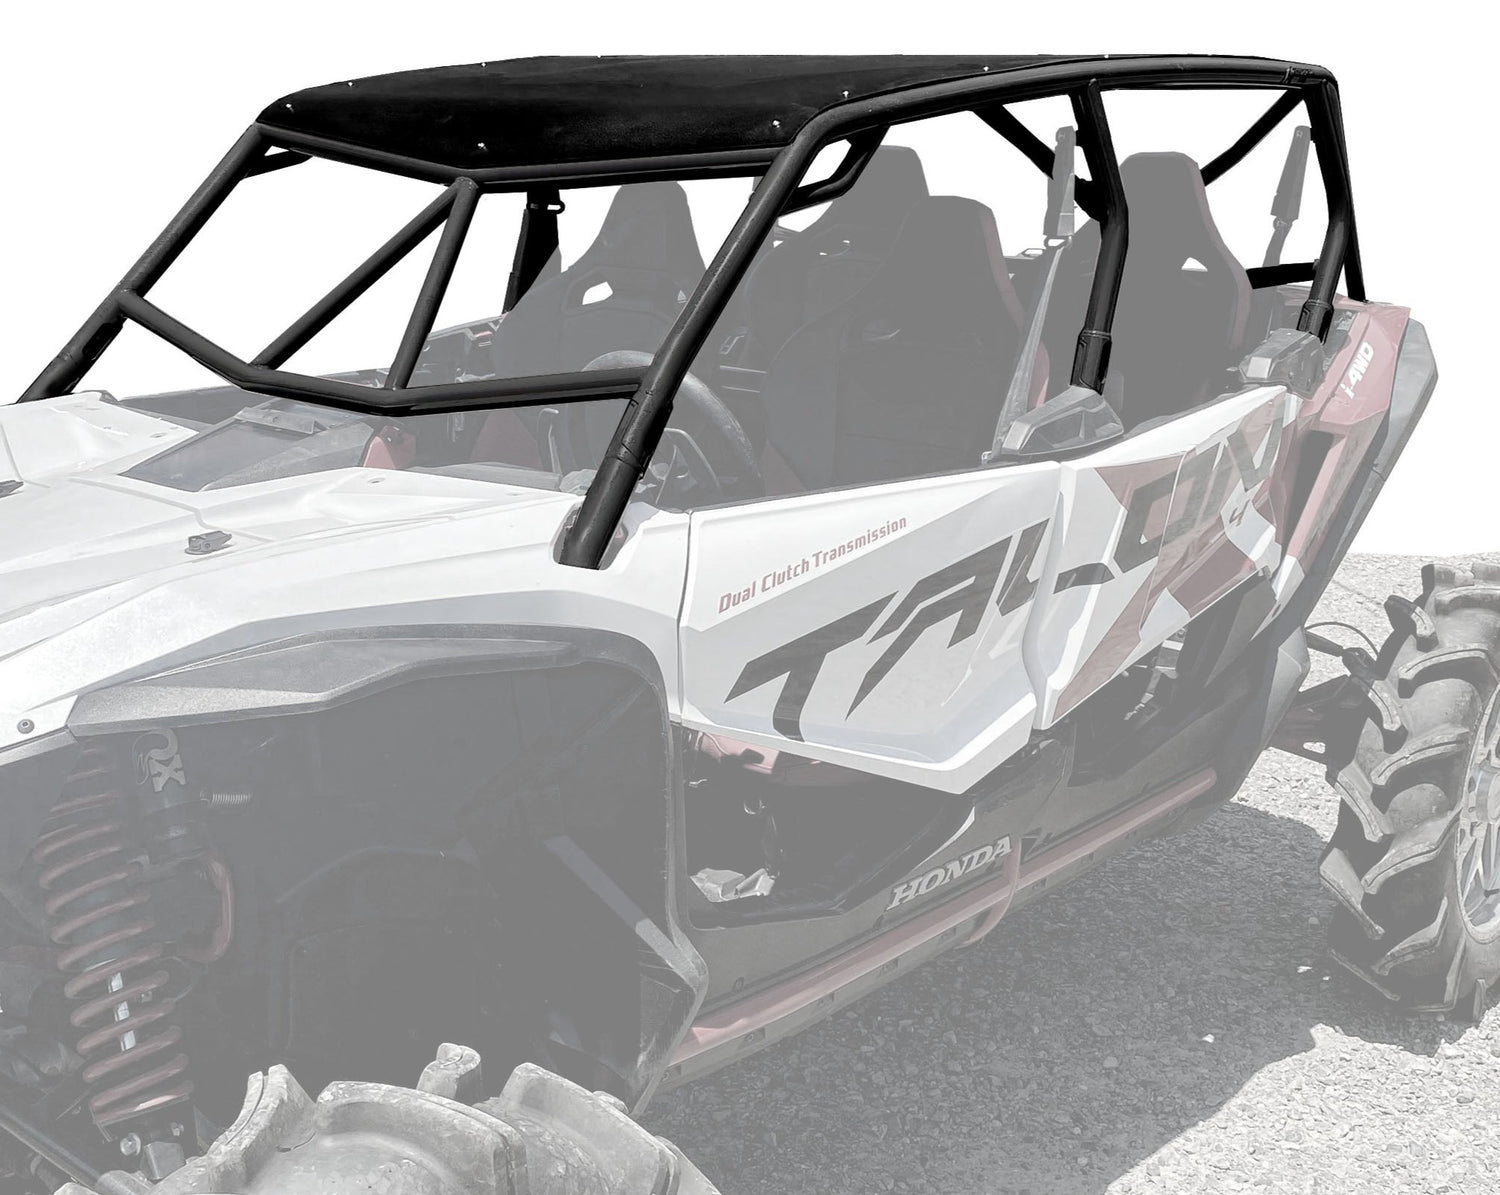 Upgrade Your Ride with Thumper Fab’s Honda Talon Cages